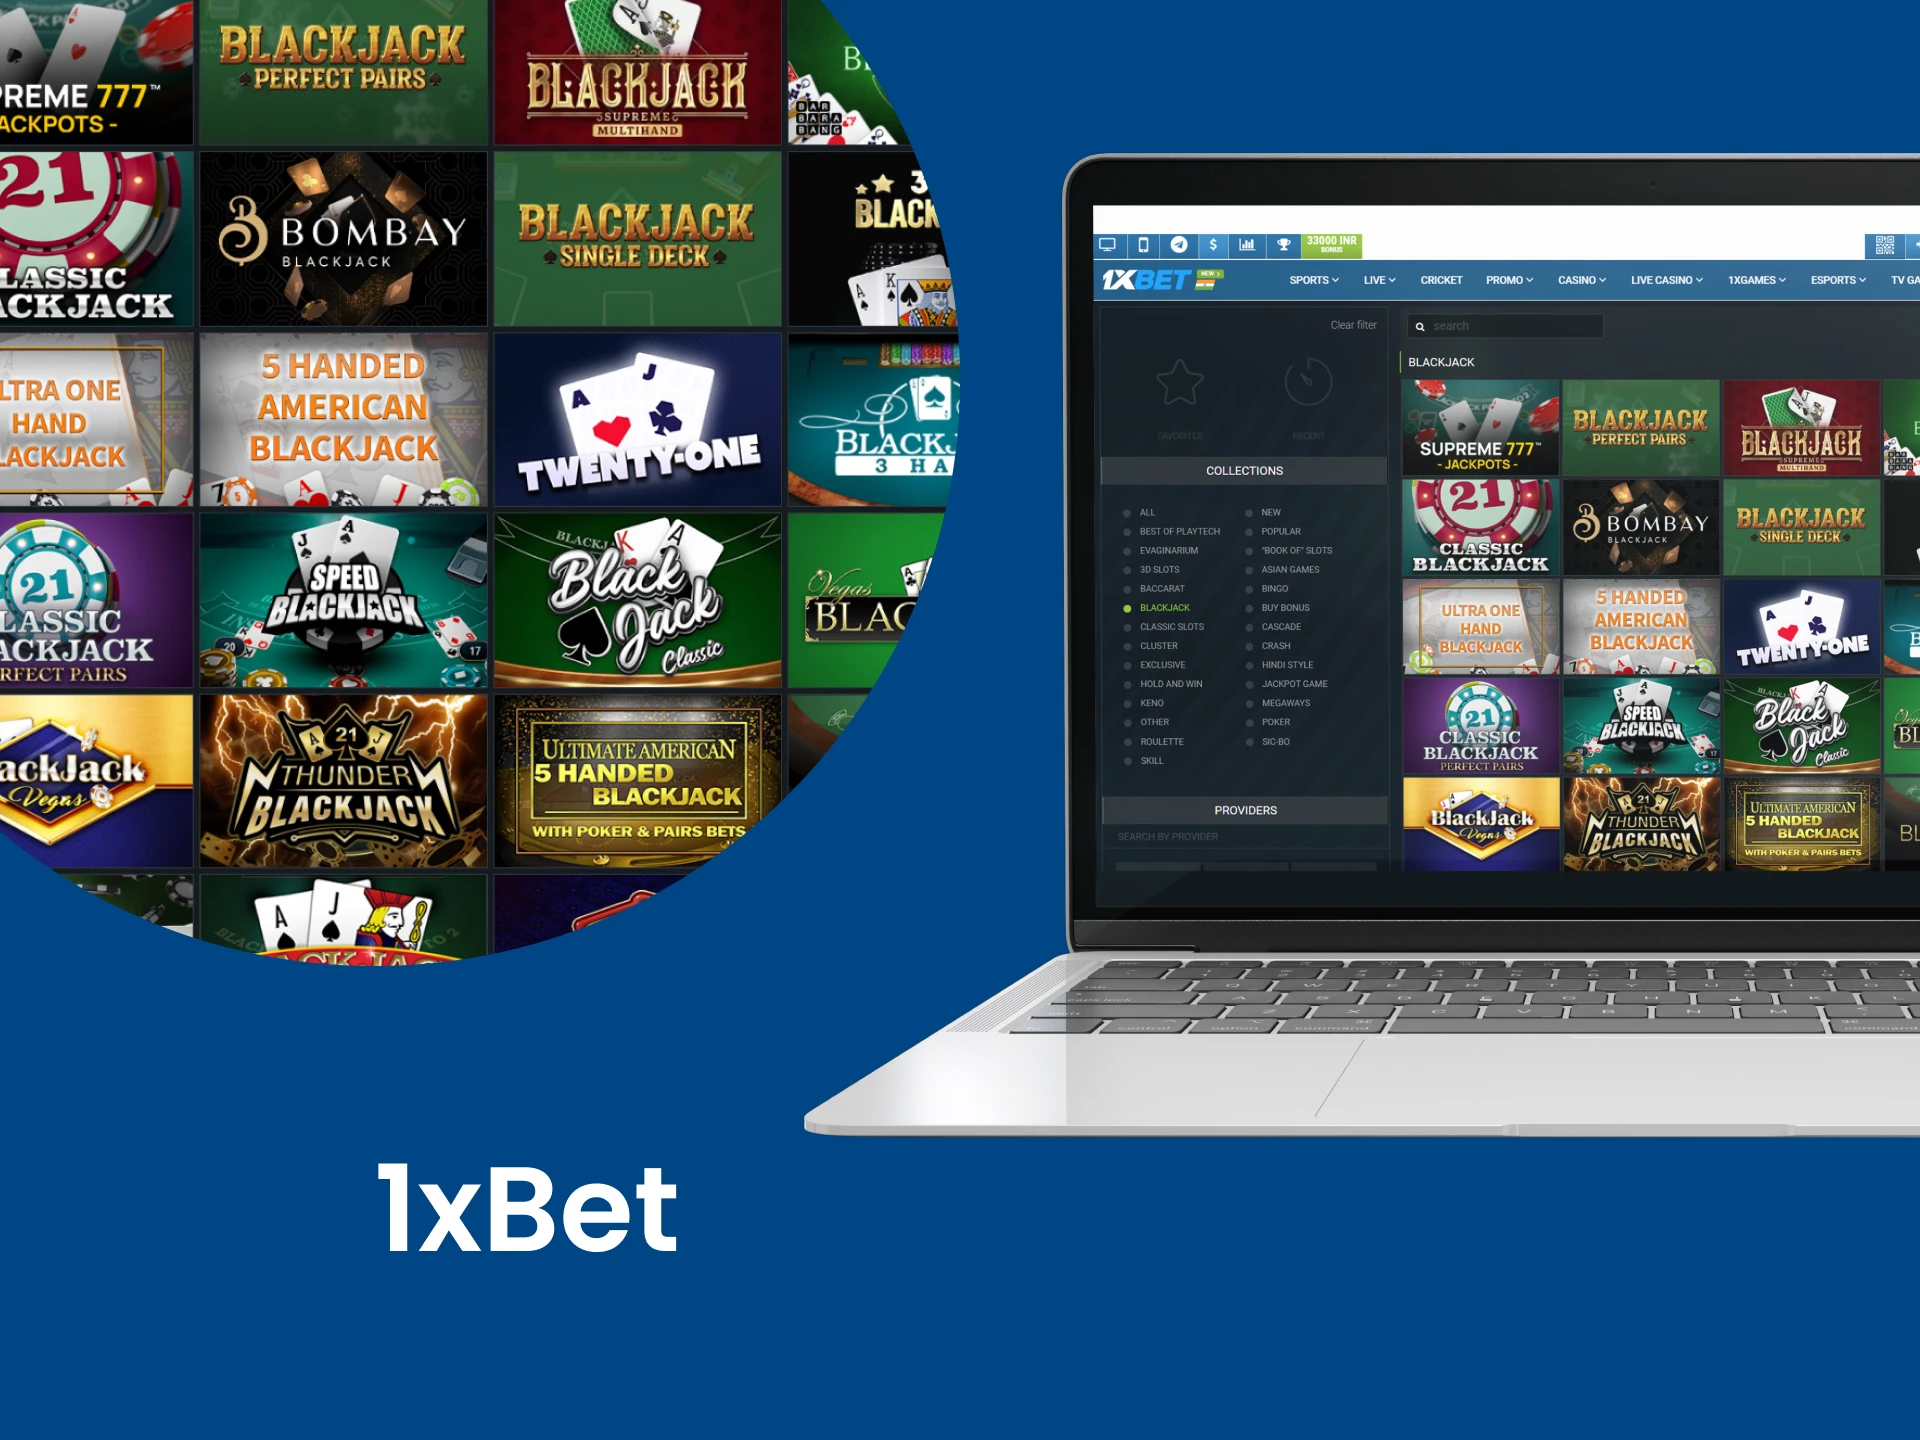 Choose from different types of table blackjack games at 1xbet.